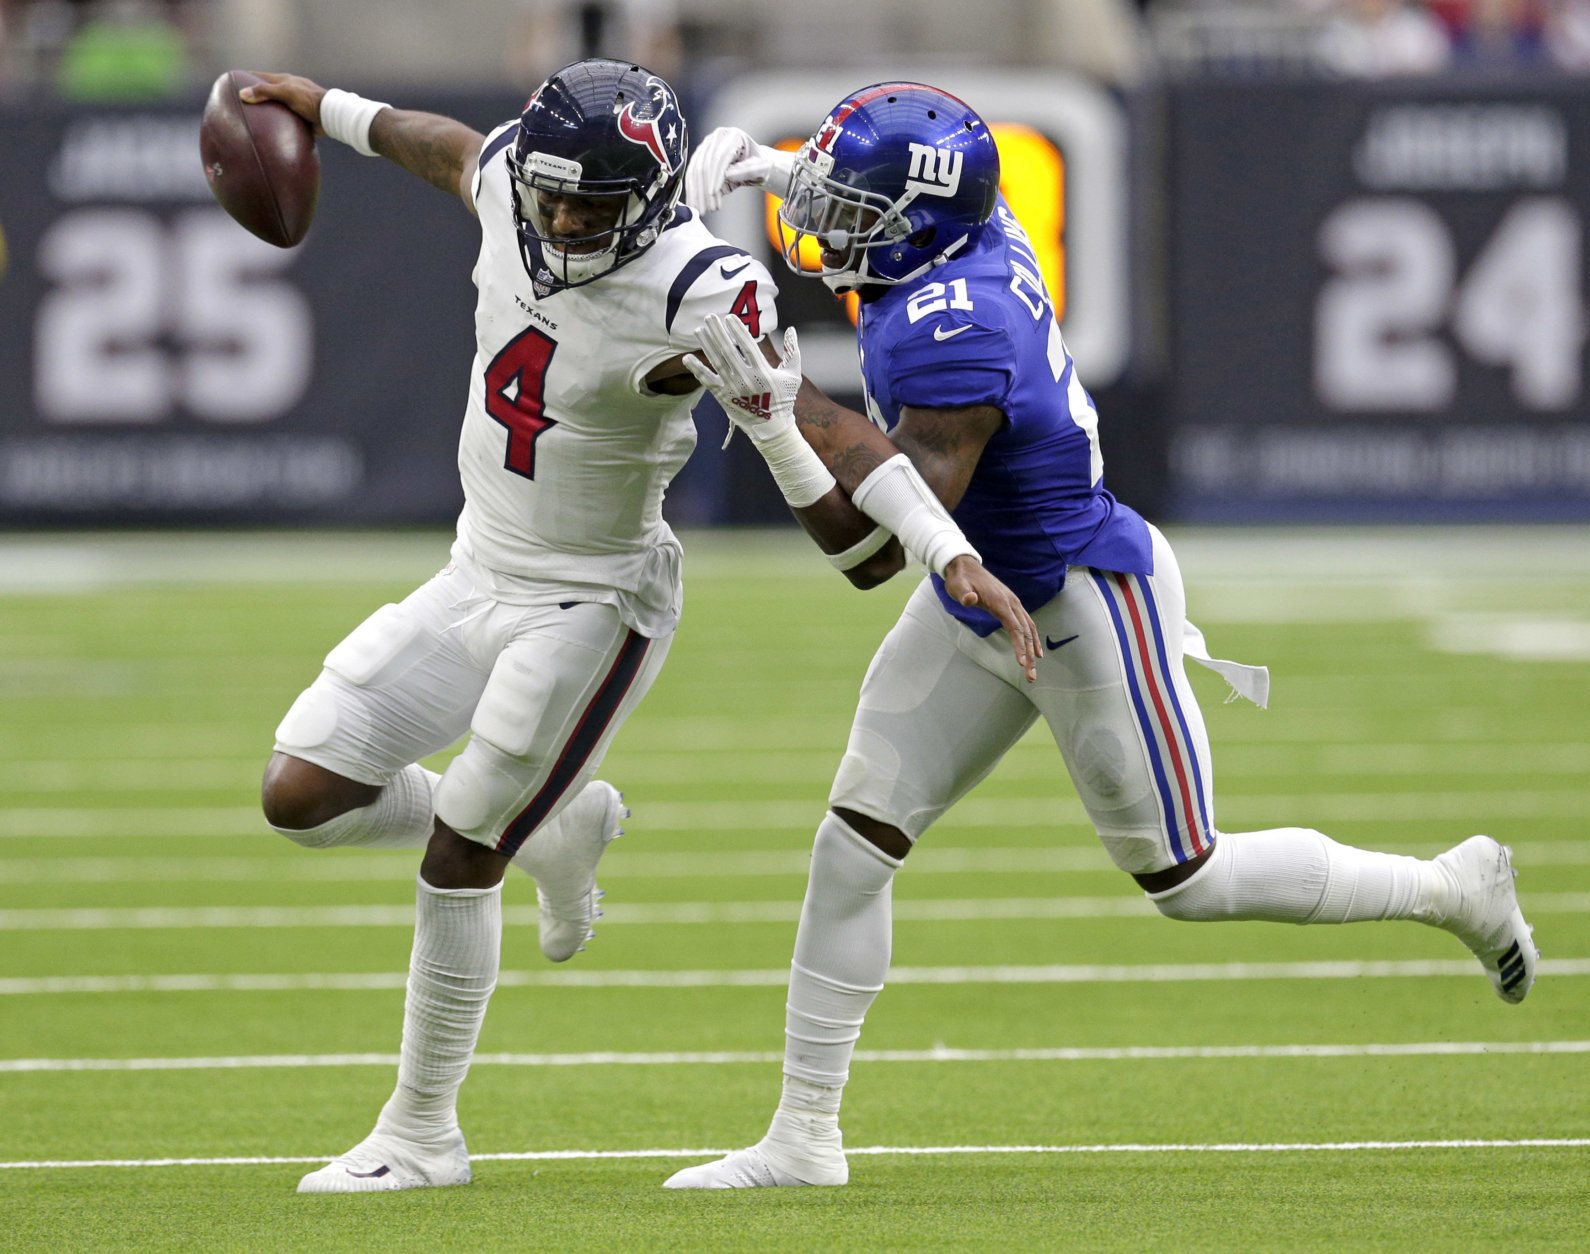 Houston Texans quarterback Deshaun Watson (4) is tackled by New York Giants defensive back Landon Collins (21) during the first half of an NFL football game Sunday, Sept. 23, 2018, in Houston. (AP Photo/Michael Wyke)